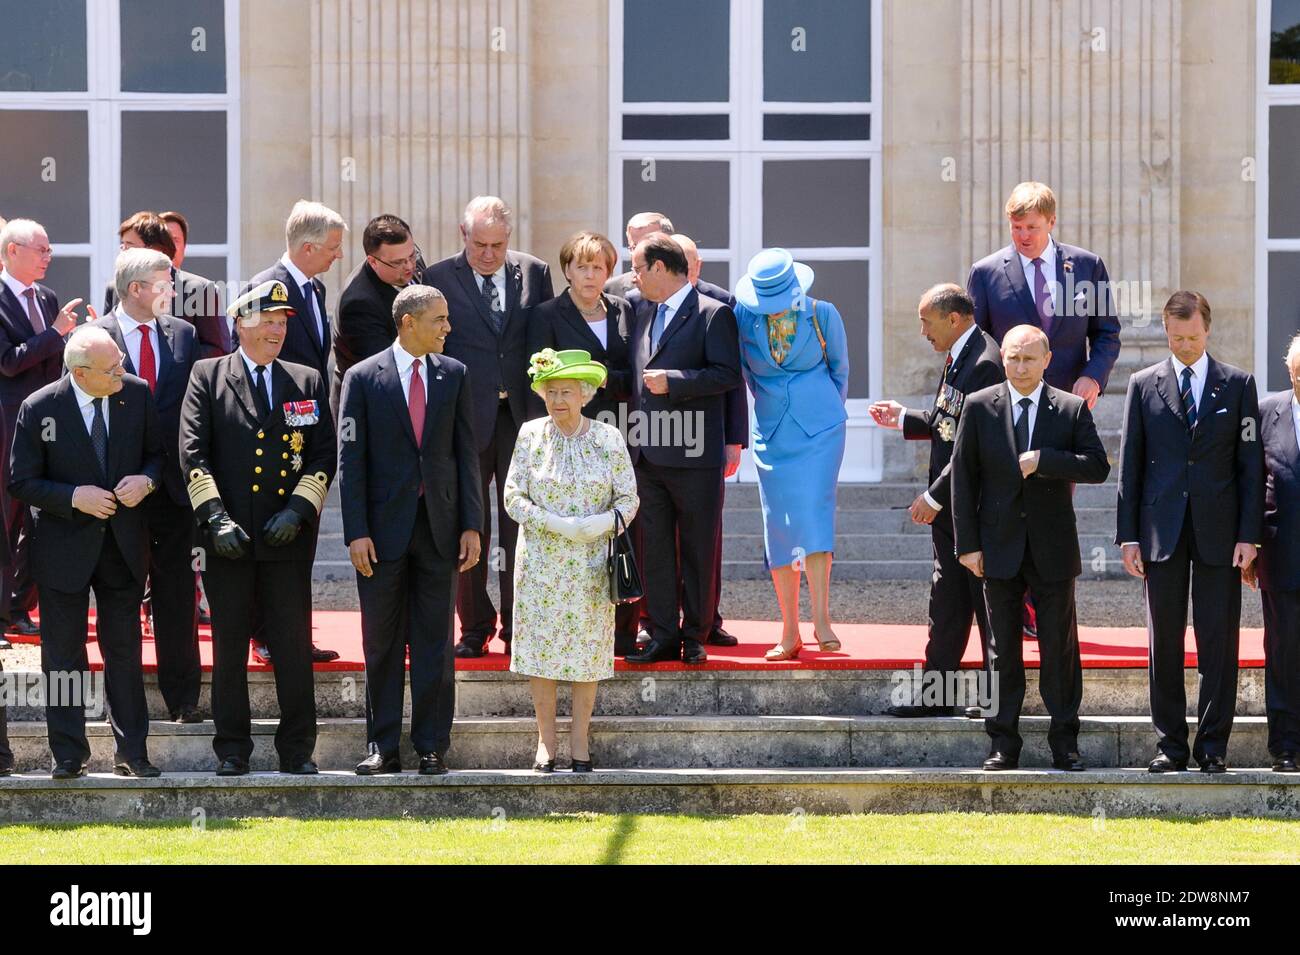 US President Barack Obama participates in a group photo of world leaders attending the D-Day 70th Anniversary ceremonies at Chateau de Benouville in Benouville, France, June 6, 2014. The D-Day ceremonies mark the 70th anniversary of the launching of 'Operation Overlord', a vast military operation by Allied forces in Normandy, which turned the tide of World War II, eventually leading to the liberation of occupied France and the end of the war against Nazi Germany. Photo by Christophe Petit Tesson/Pool/ABACAPRESS.COM Stock Photo